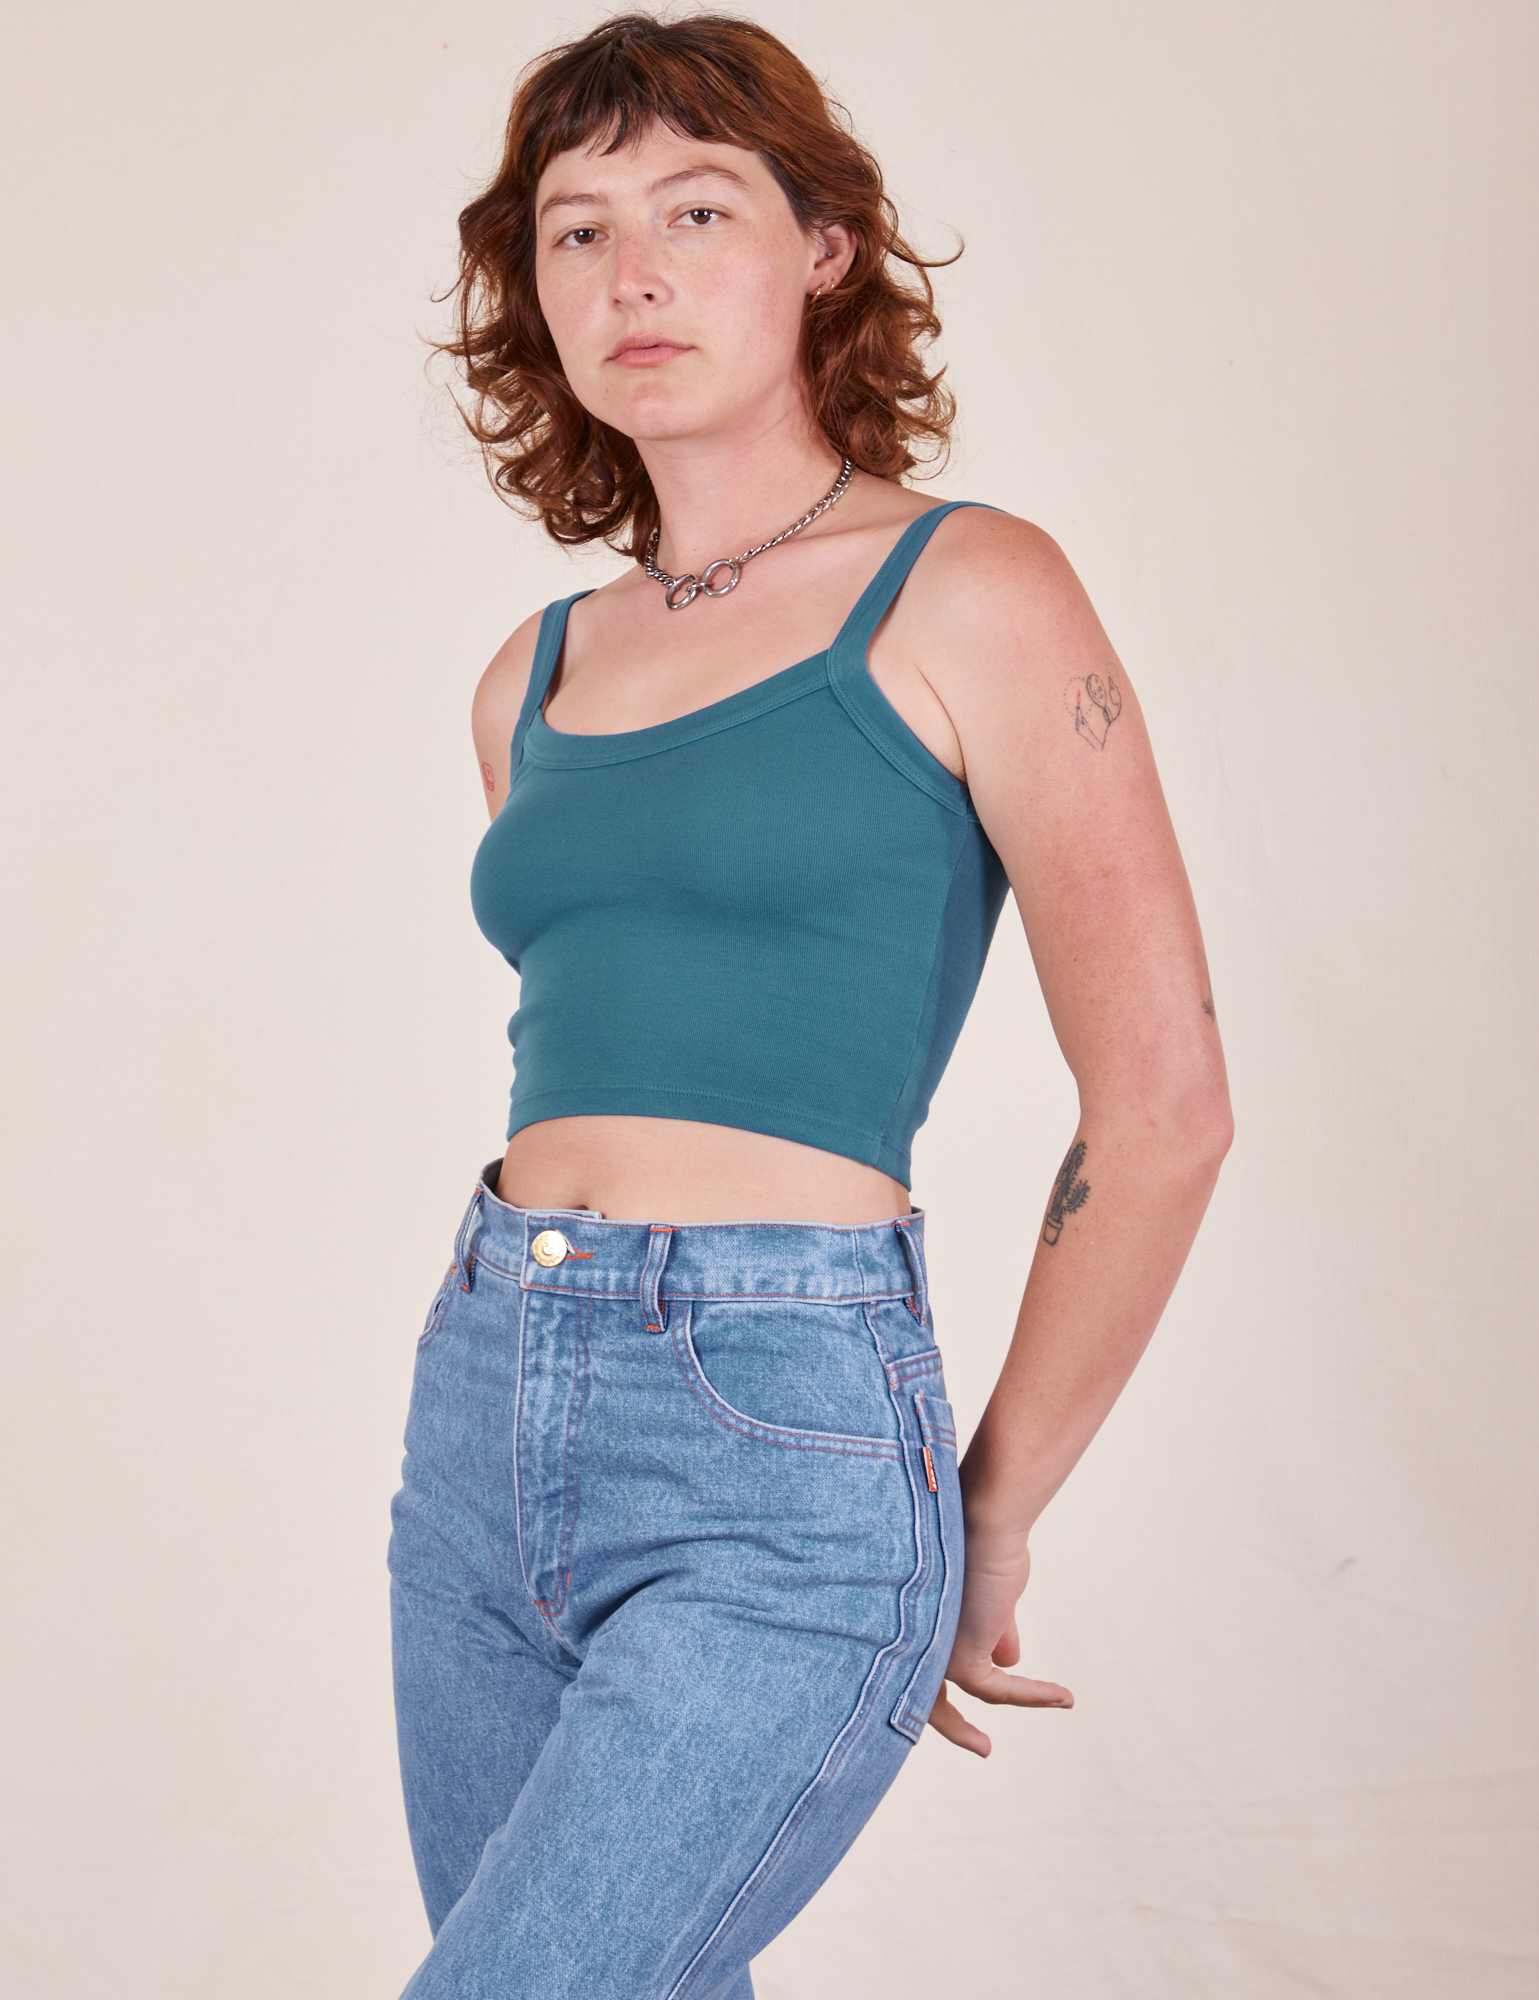 Alex is 5&#39;8&quot; and wearing P Cropped Cami in Marine Blue and light wash Frontier Jeans